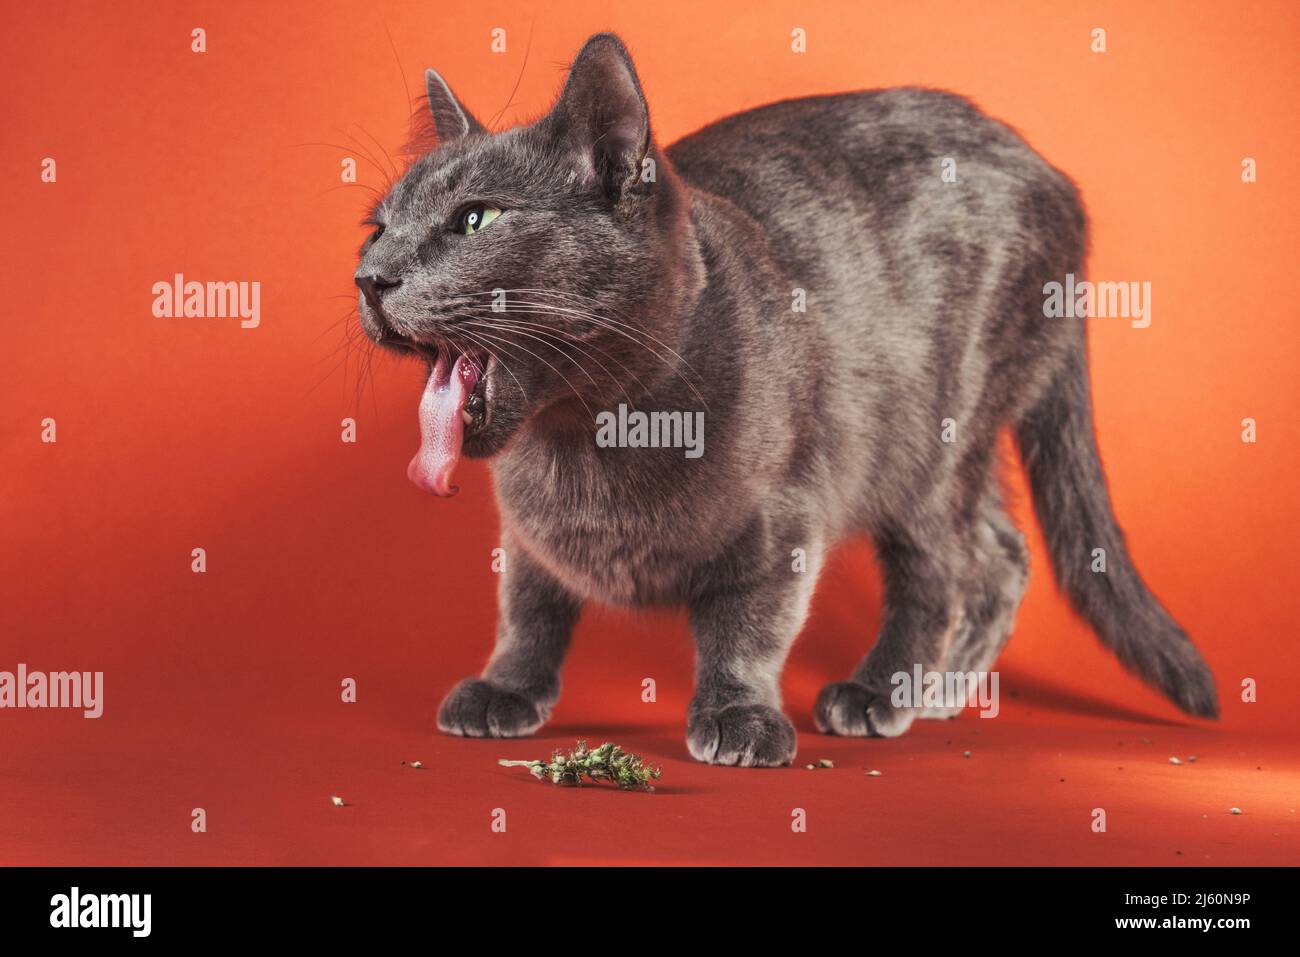 Full-body studio portrait of a gray cat with tongue fully extended while eating catnip. Stock Photo